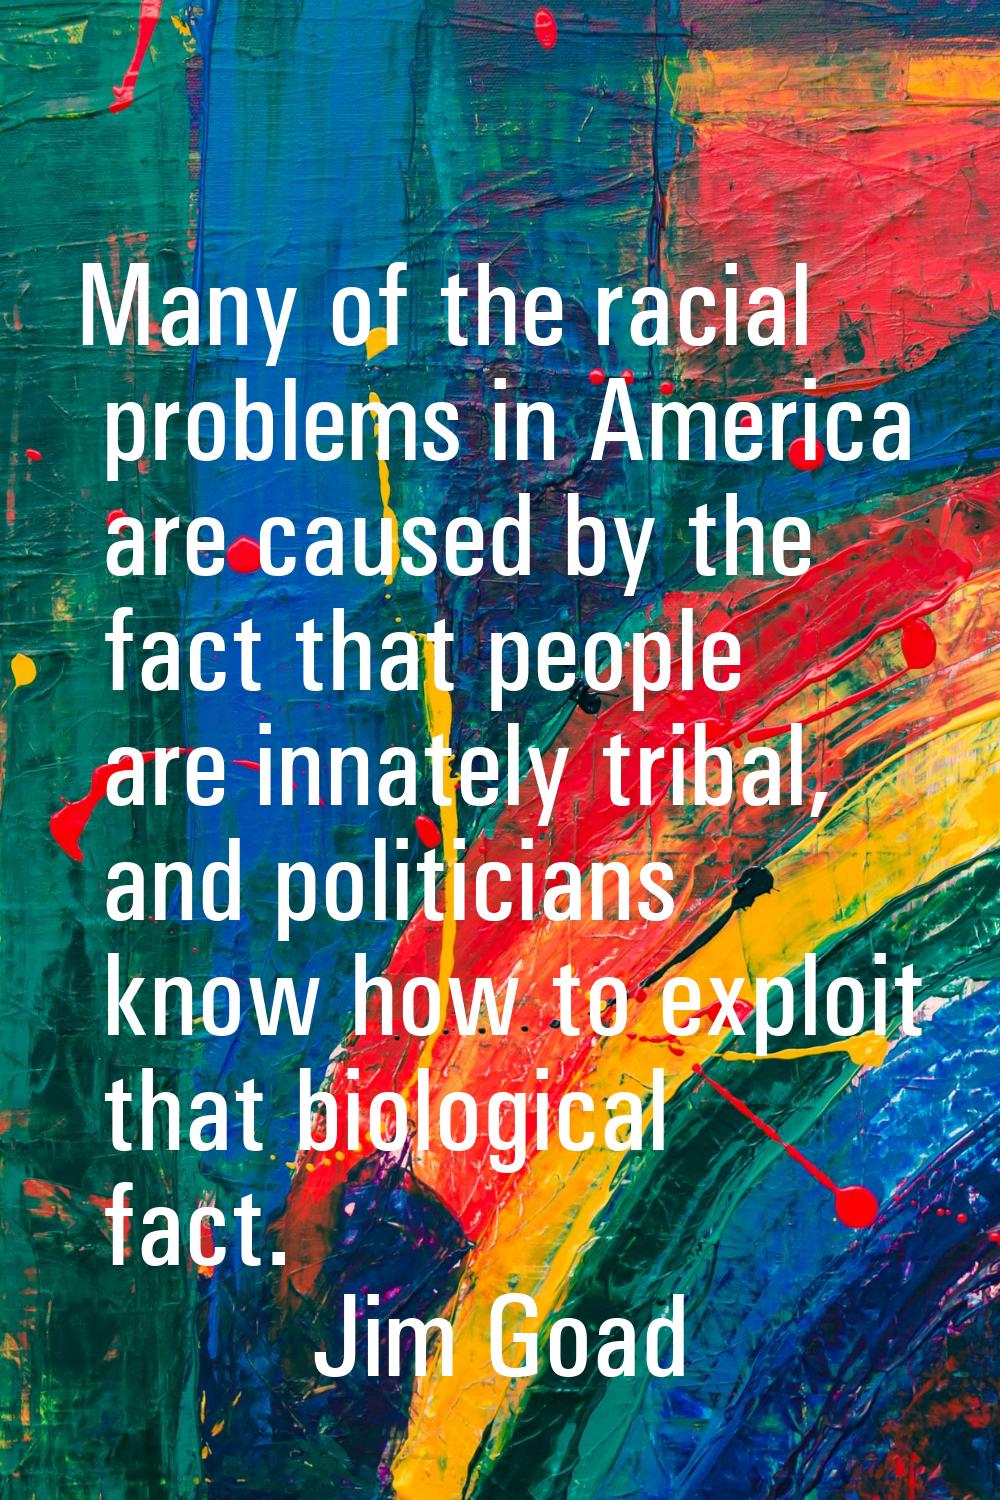 Many of the racial problems in America are caused by the fact that people are innately tribal, and 